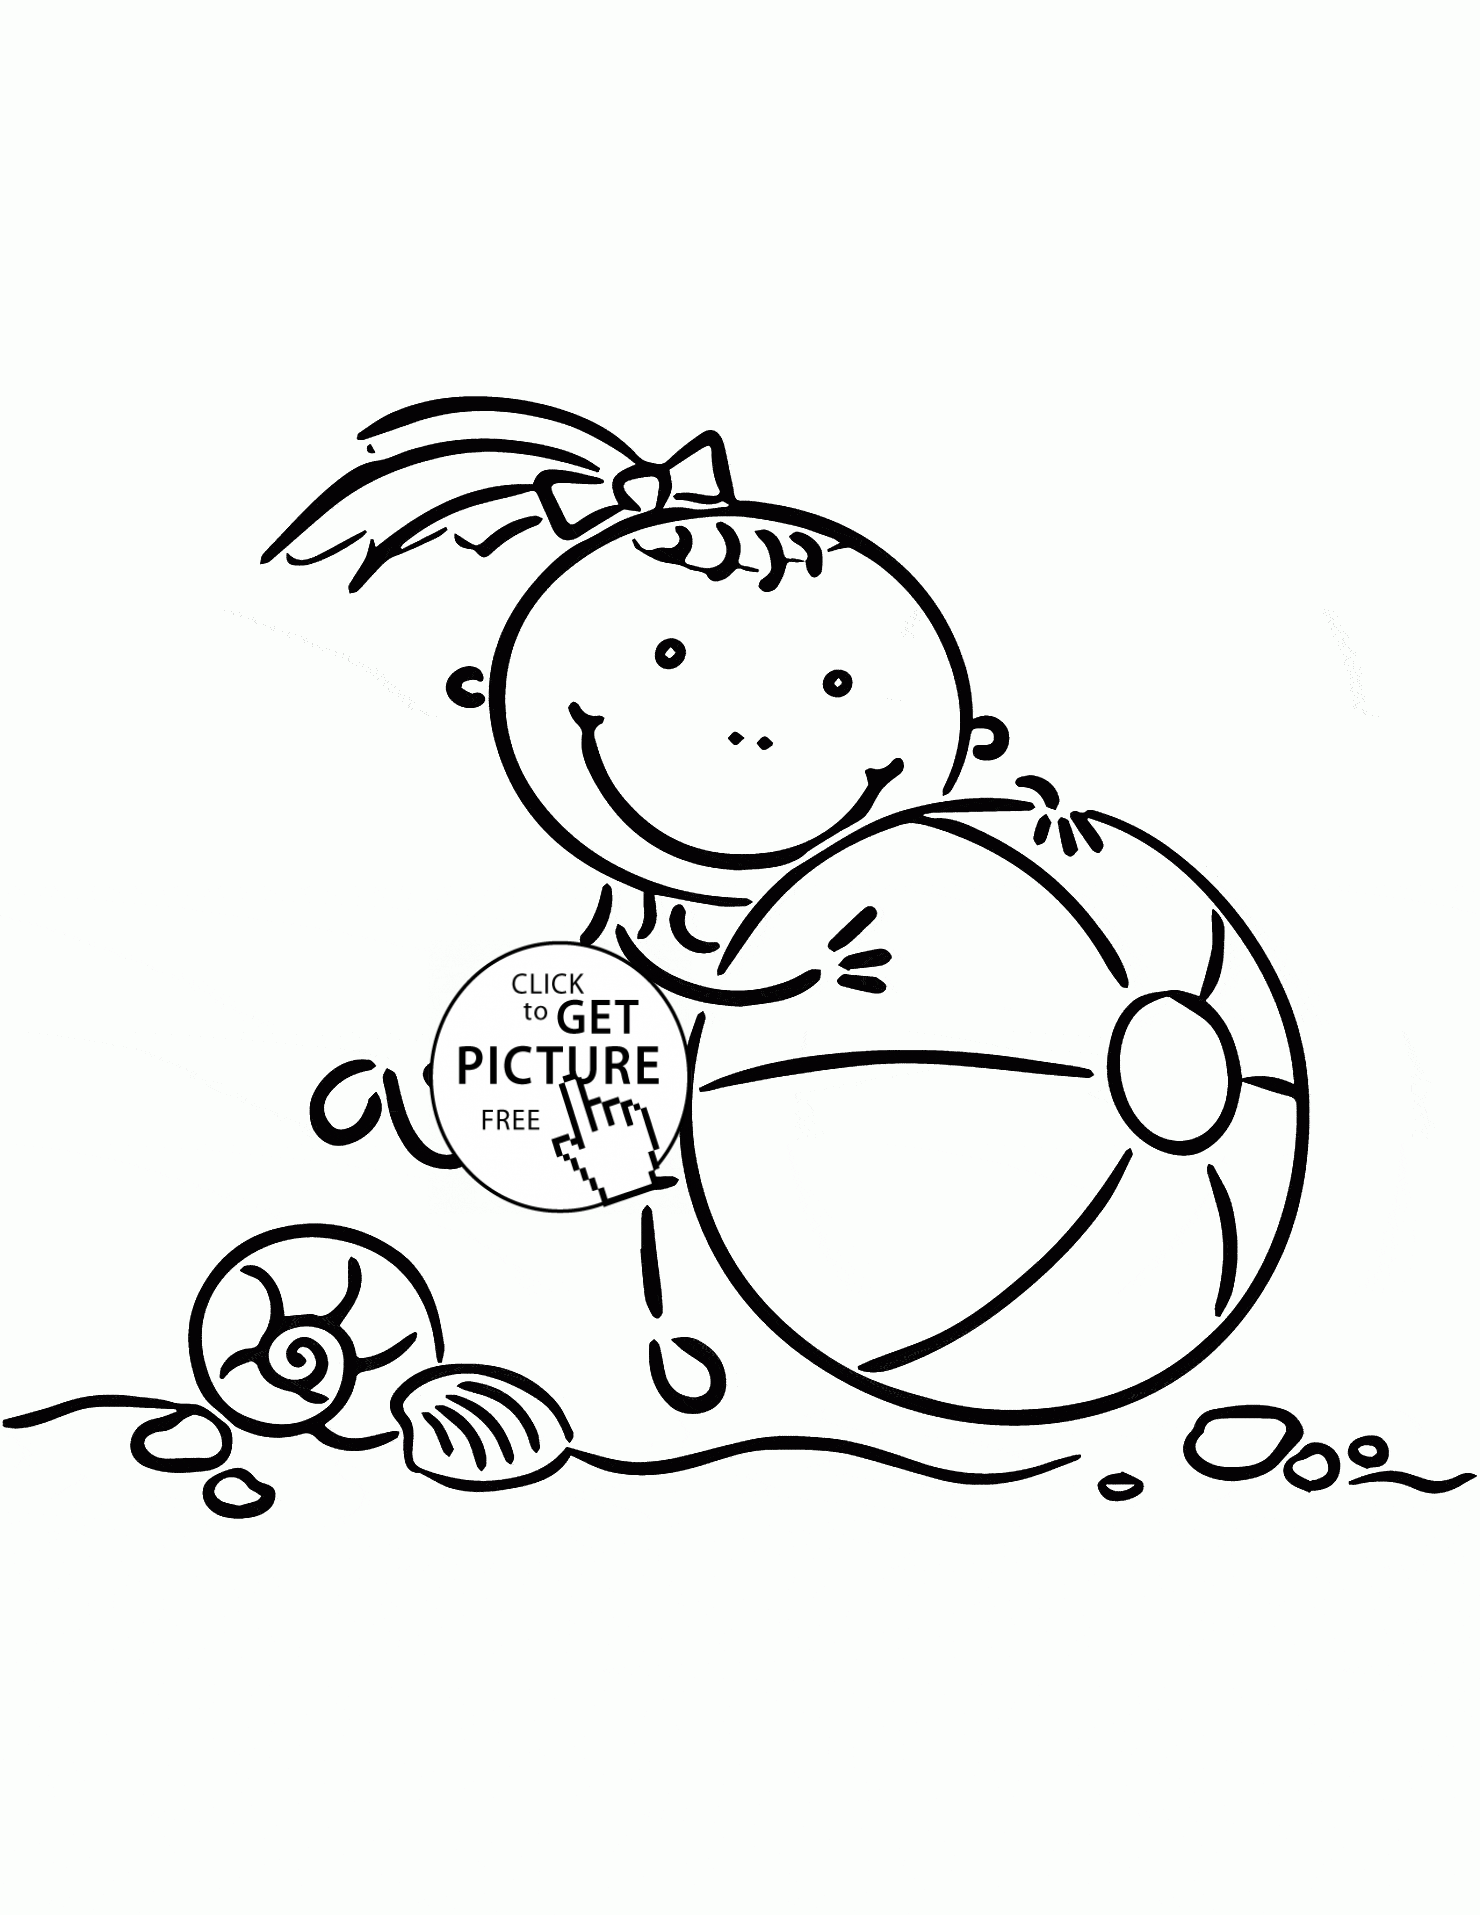 Little Girl with Beach Ball coloring page for kids, seasons ...